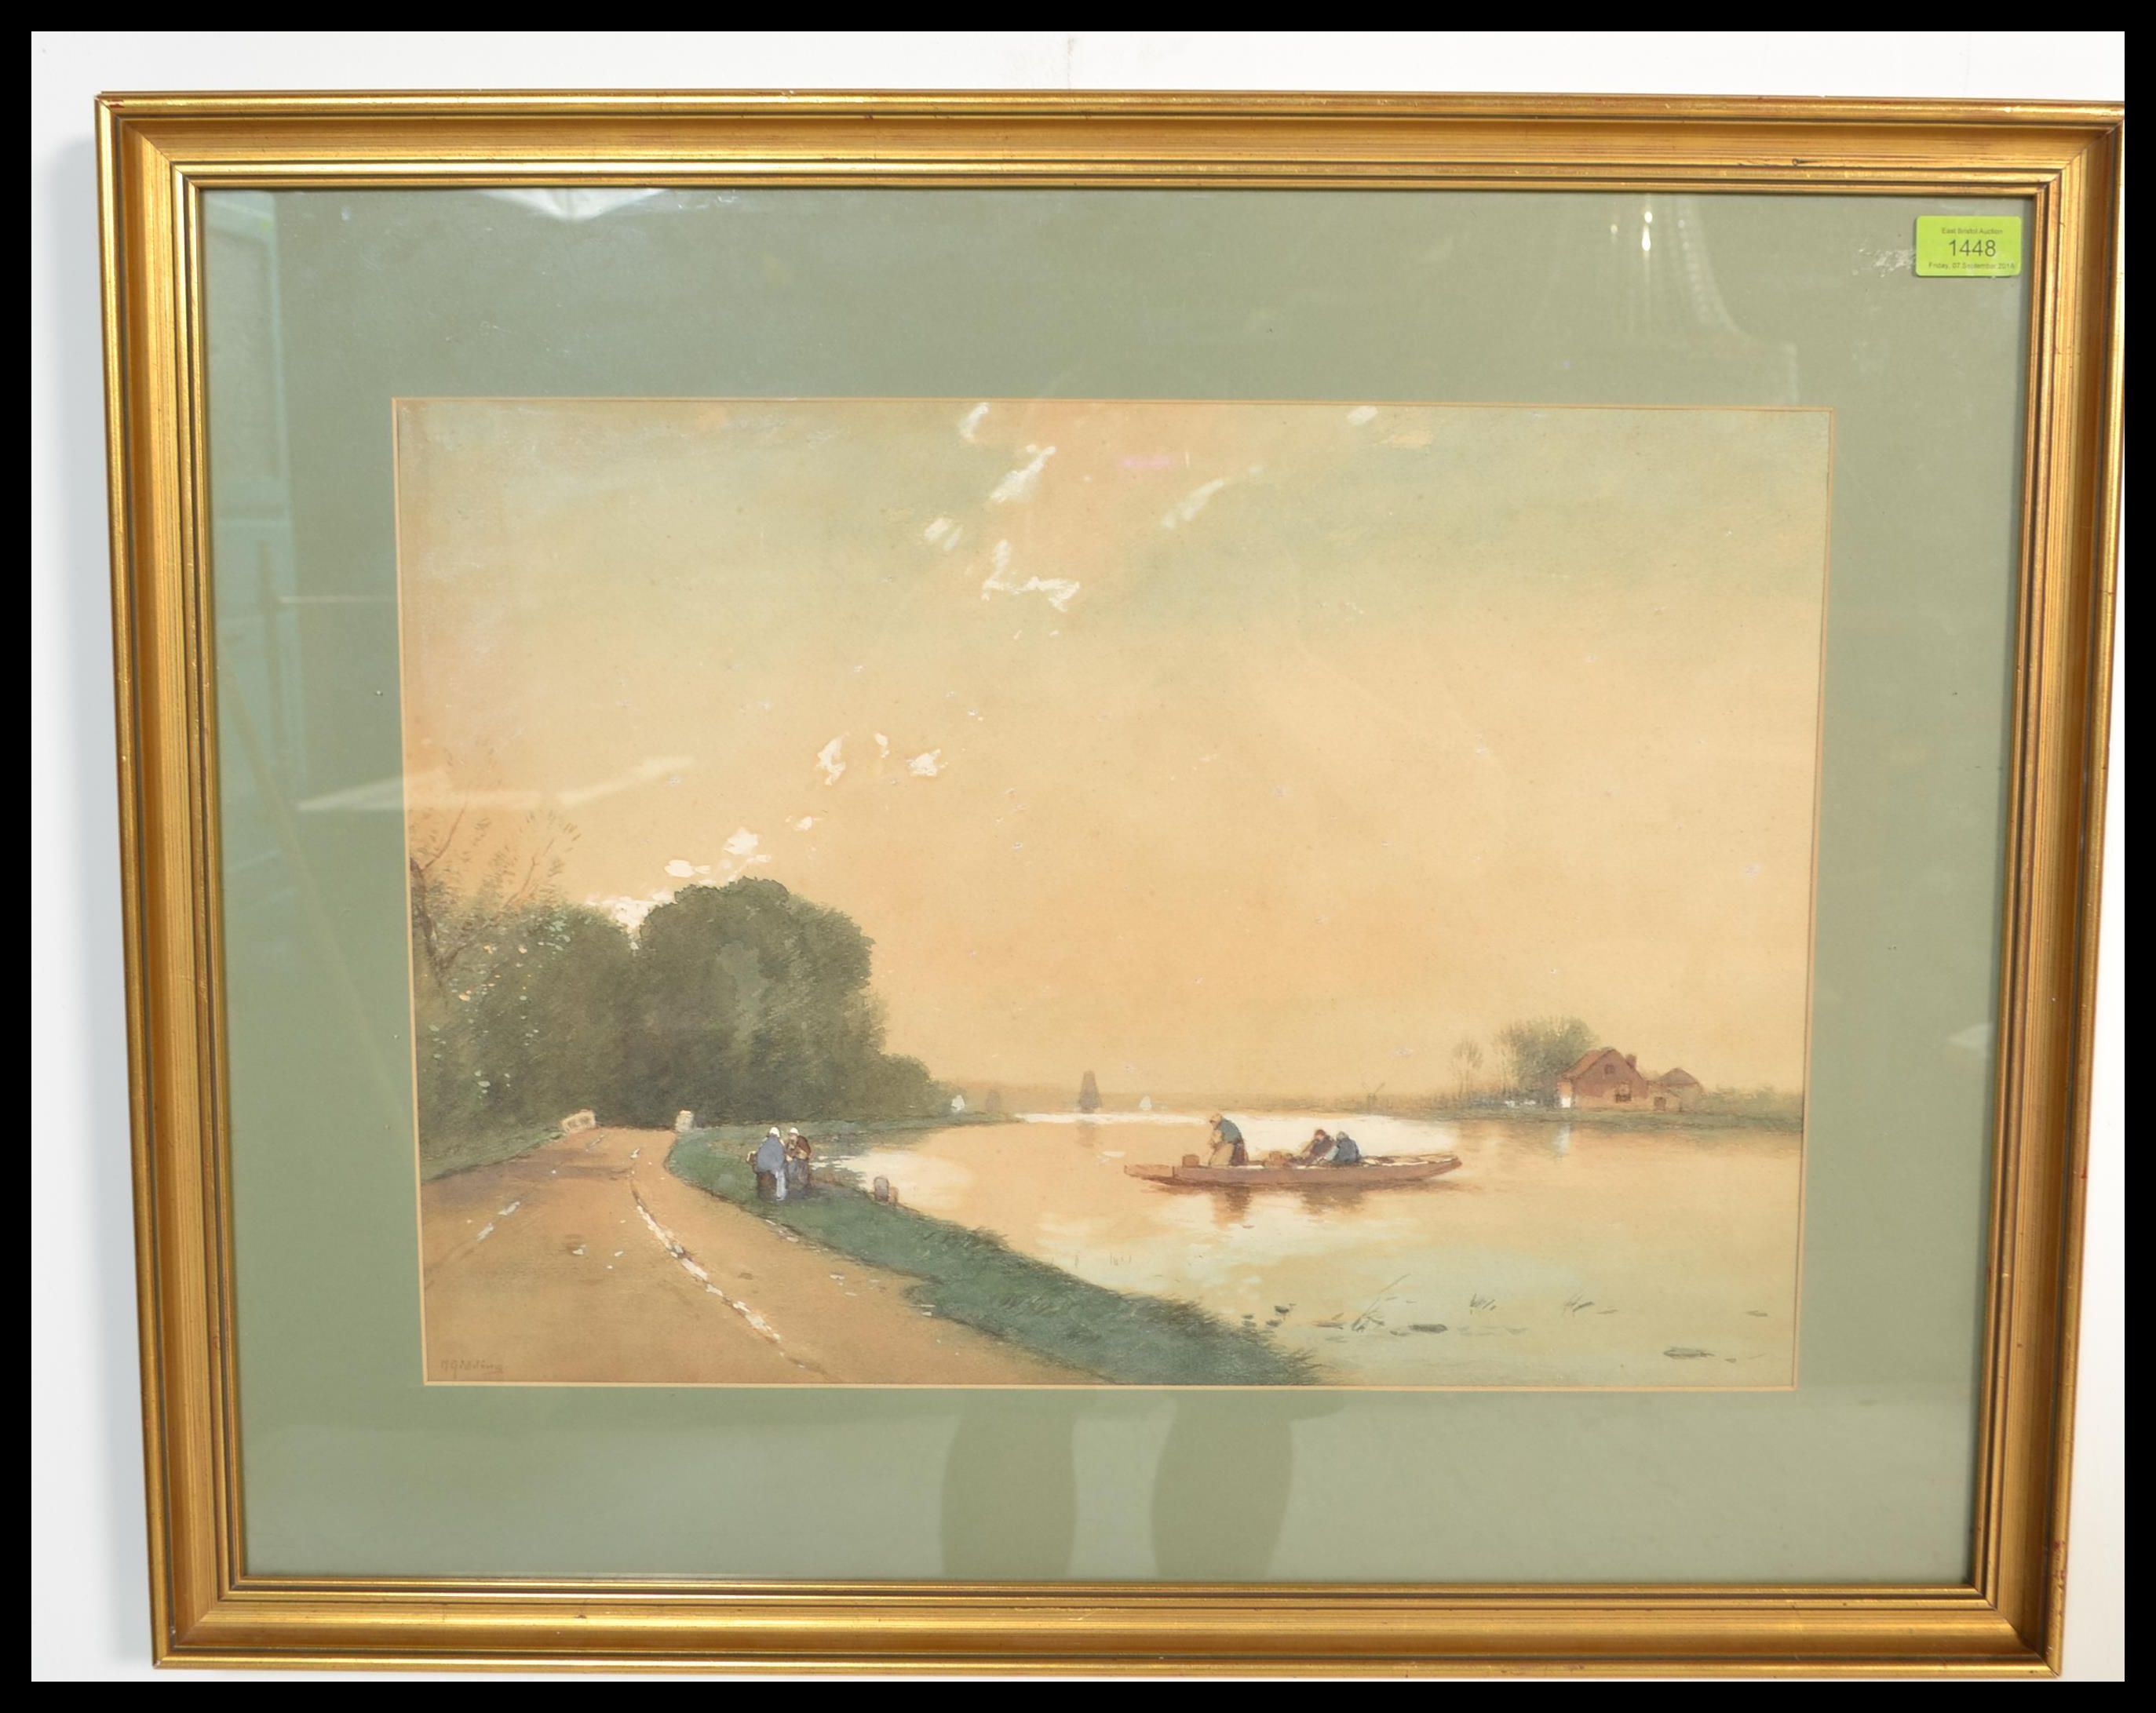 An early 20th century water colour painting on pap - Image 2 of 3